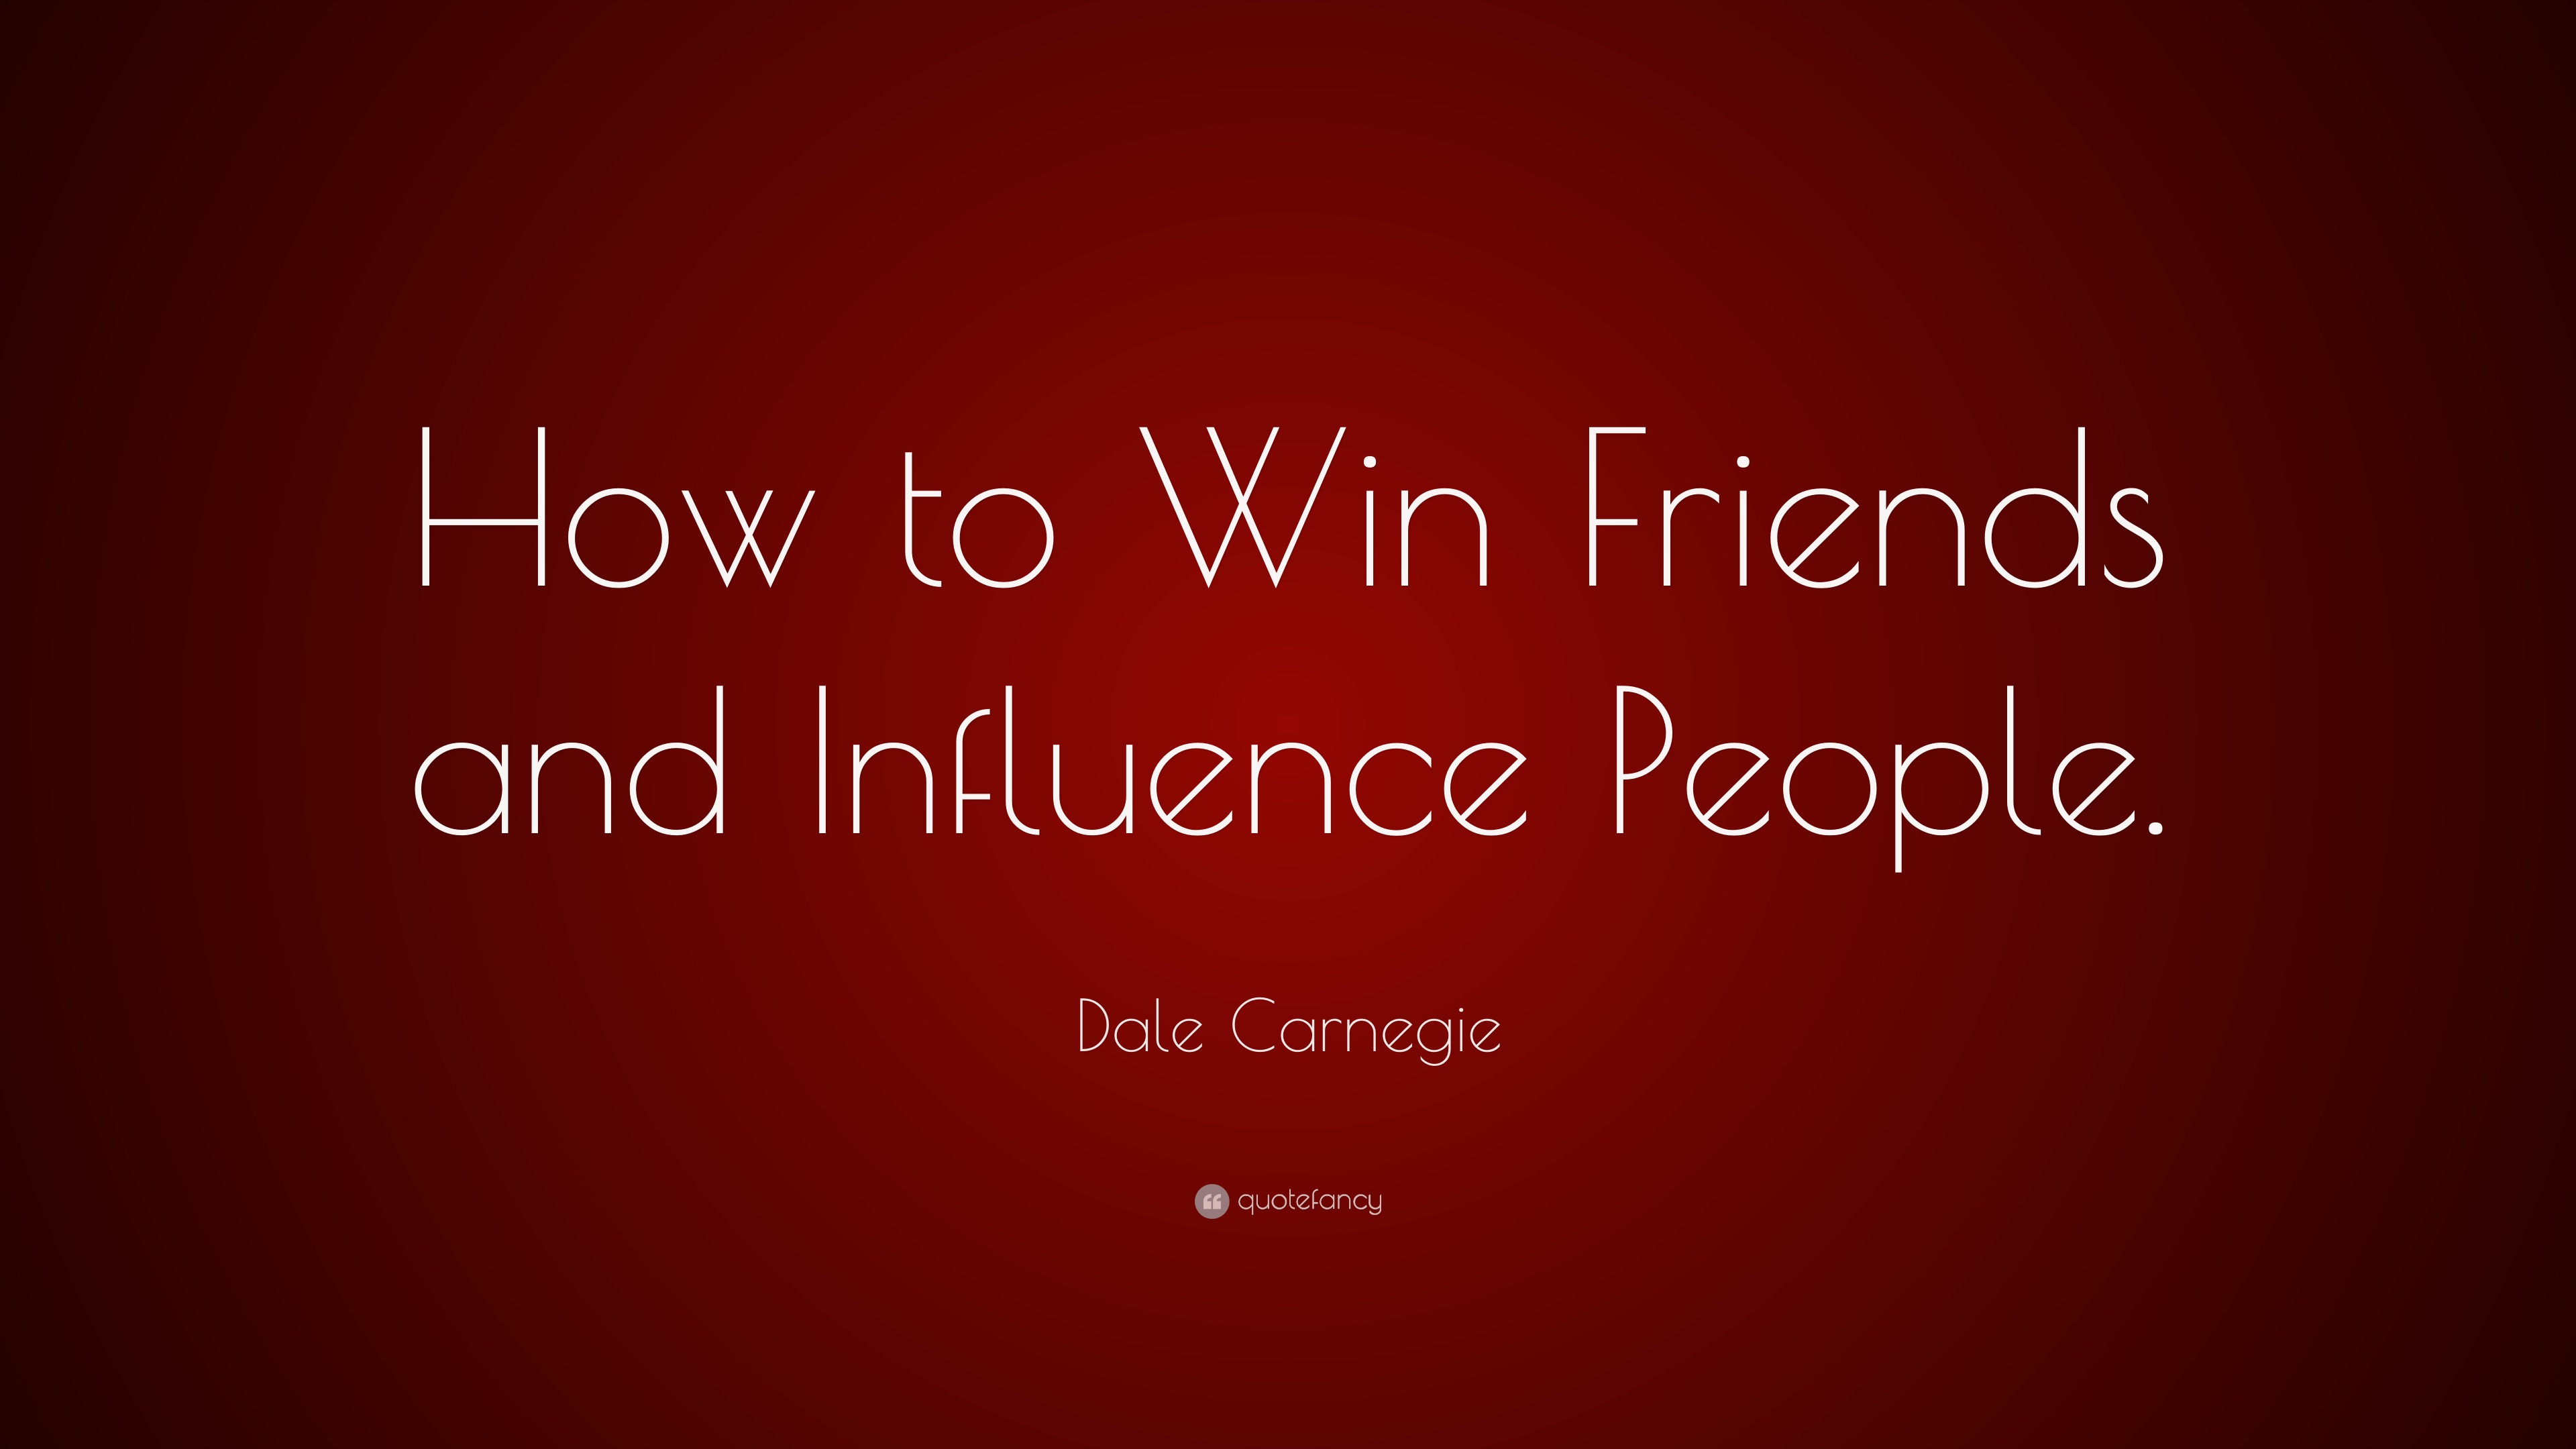 How to Win Friends and Influence People download the last version for ipod